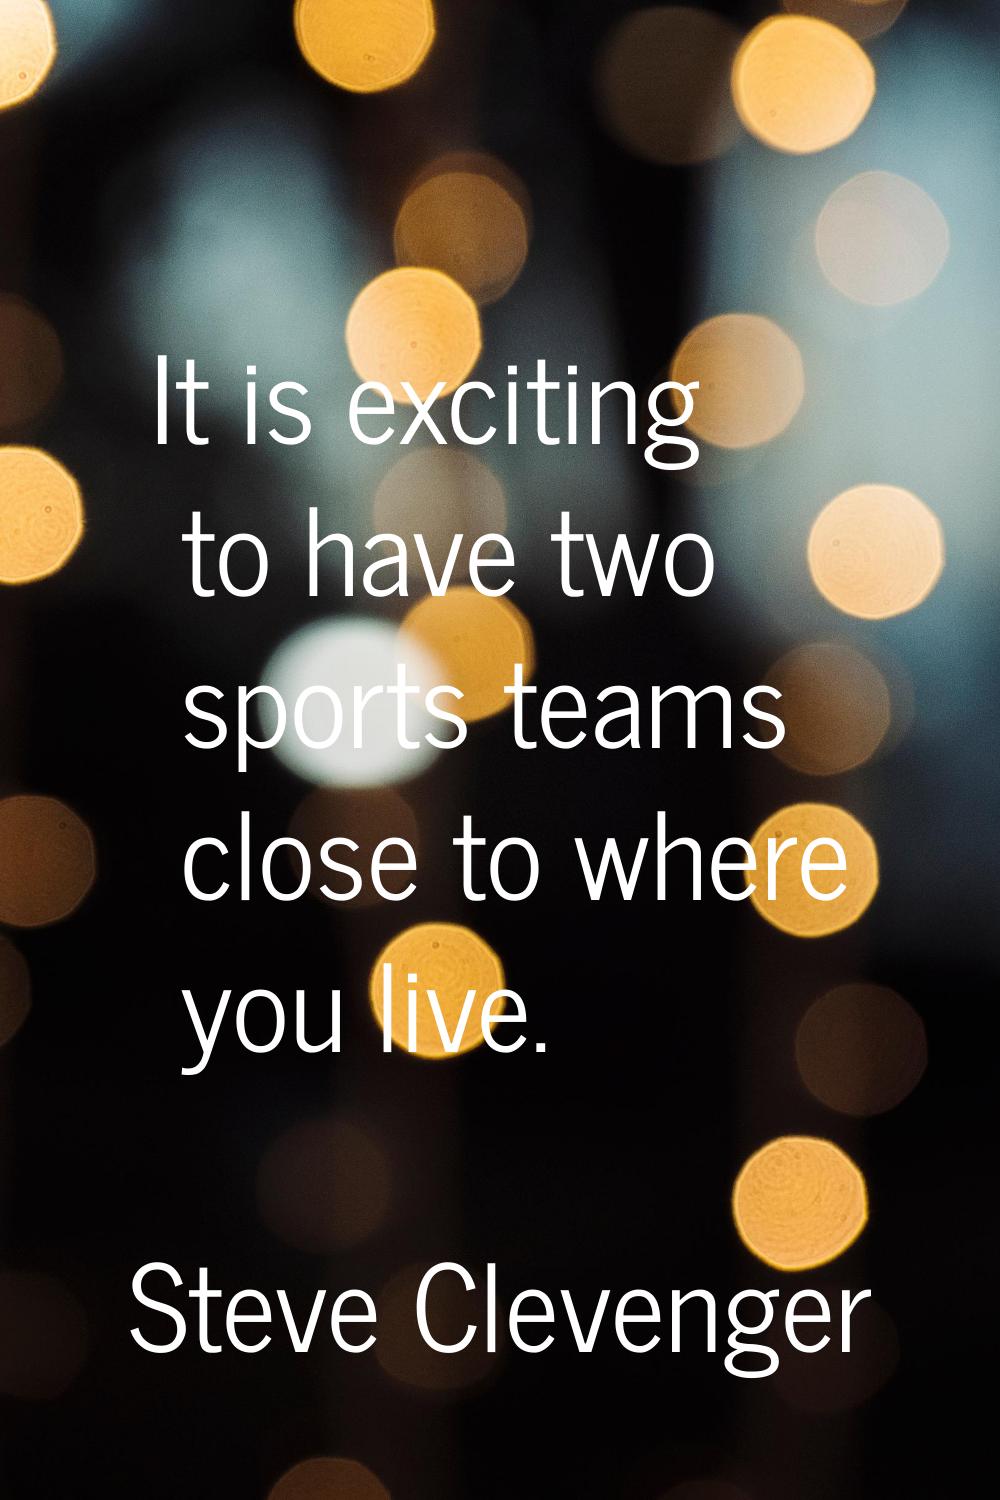 It is exciting to have two sports teams close to where you live.